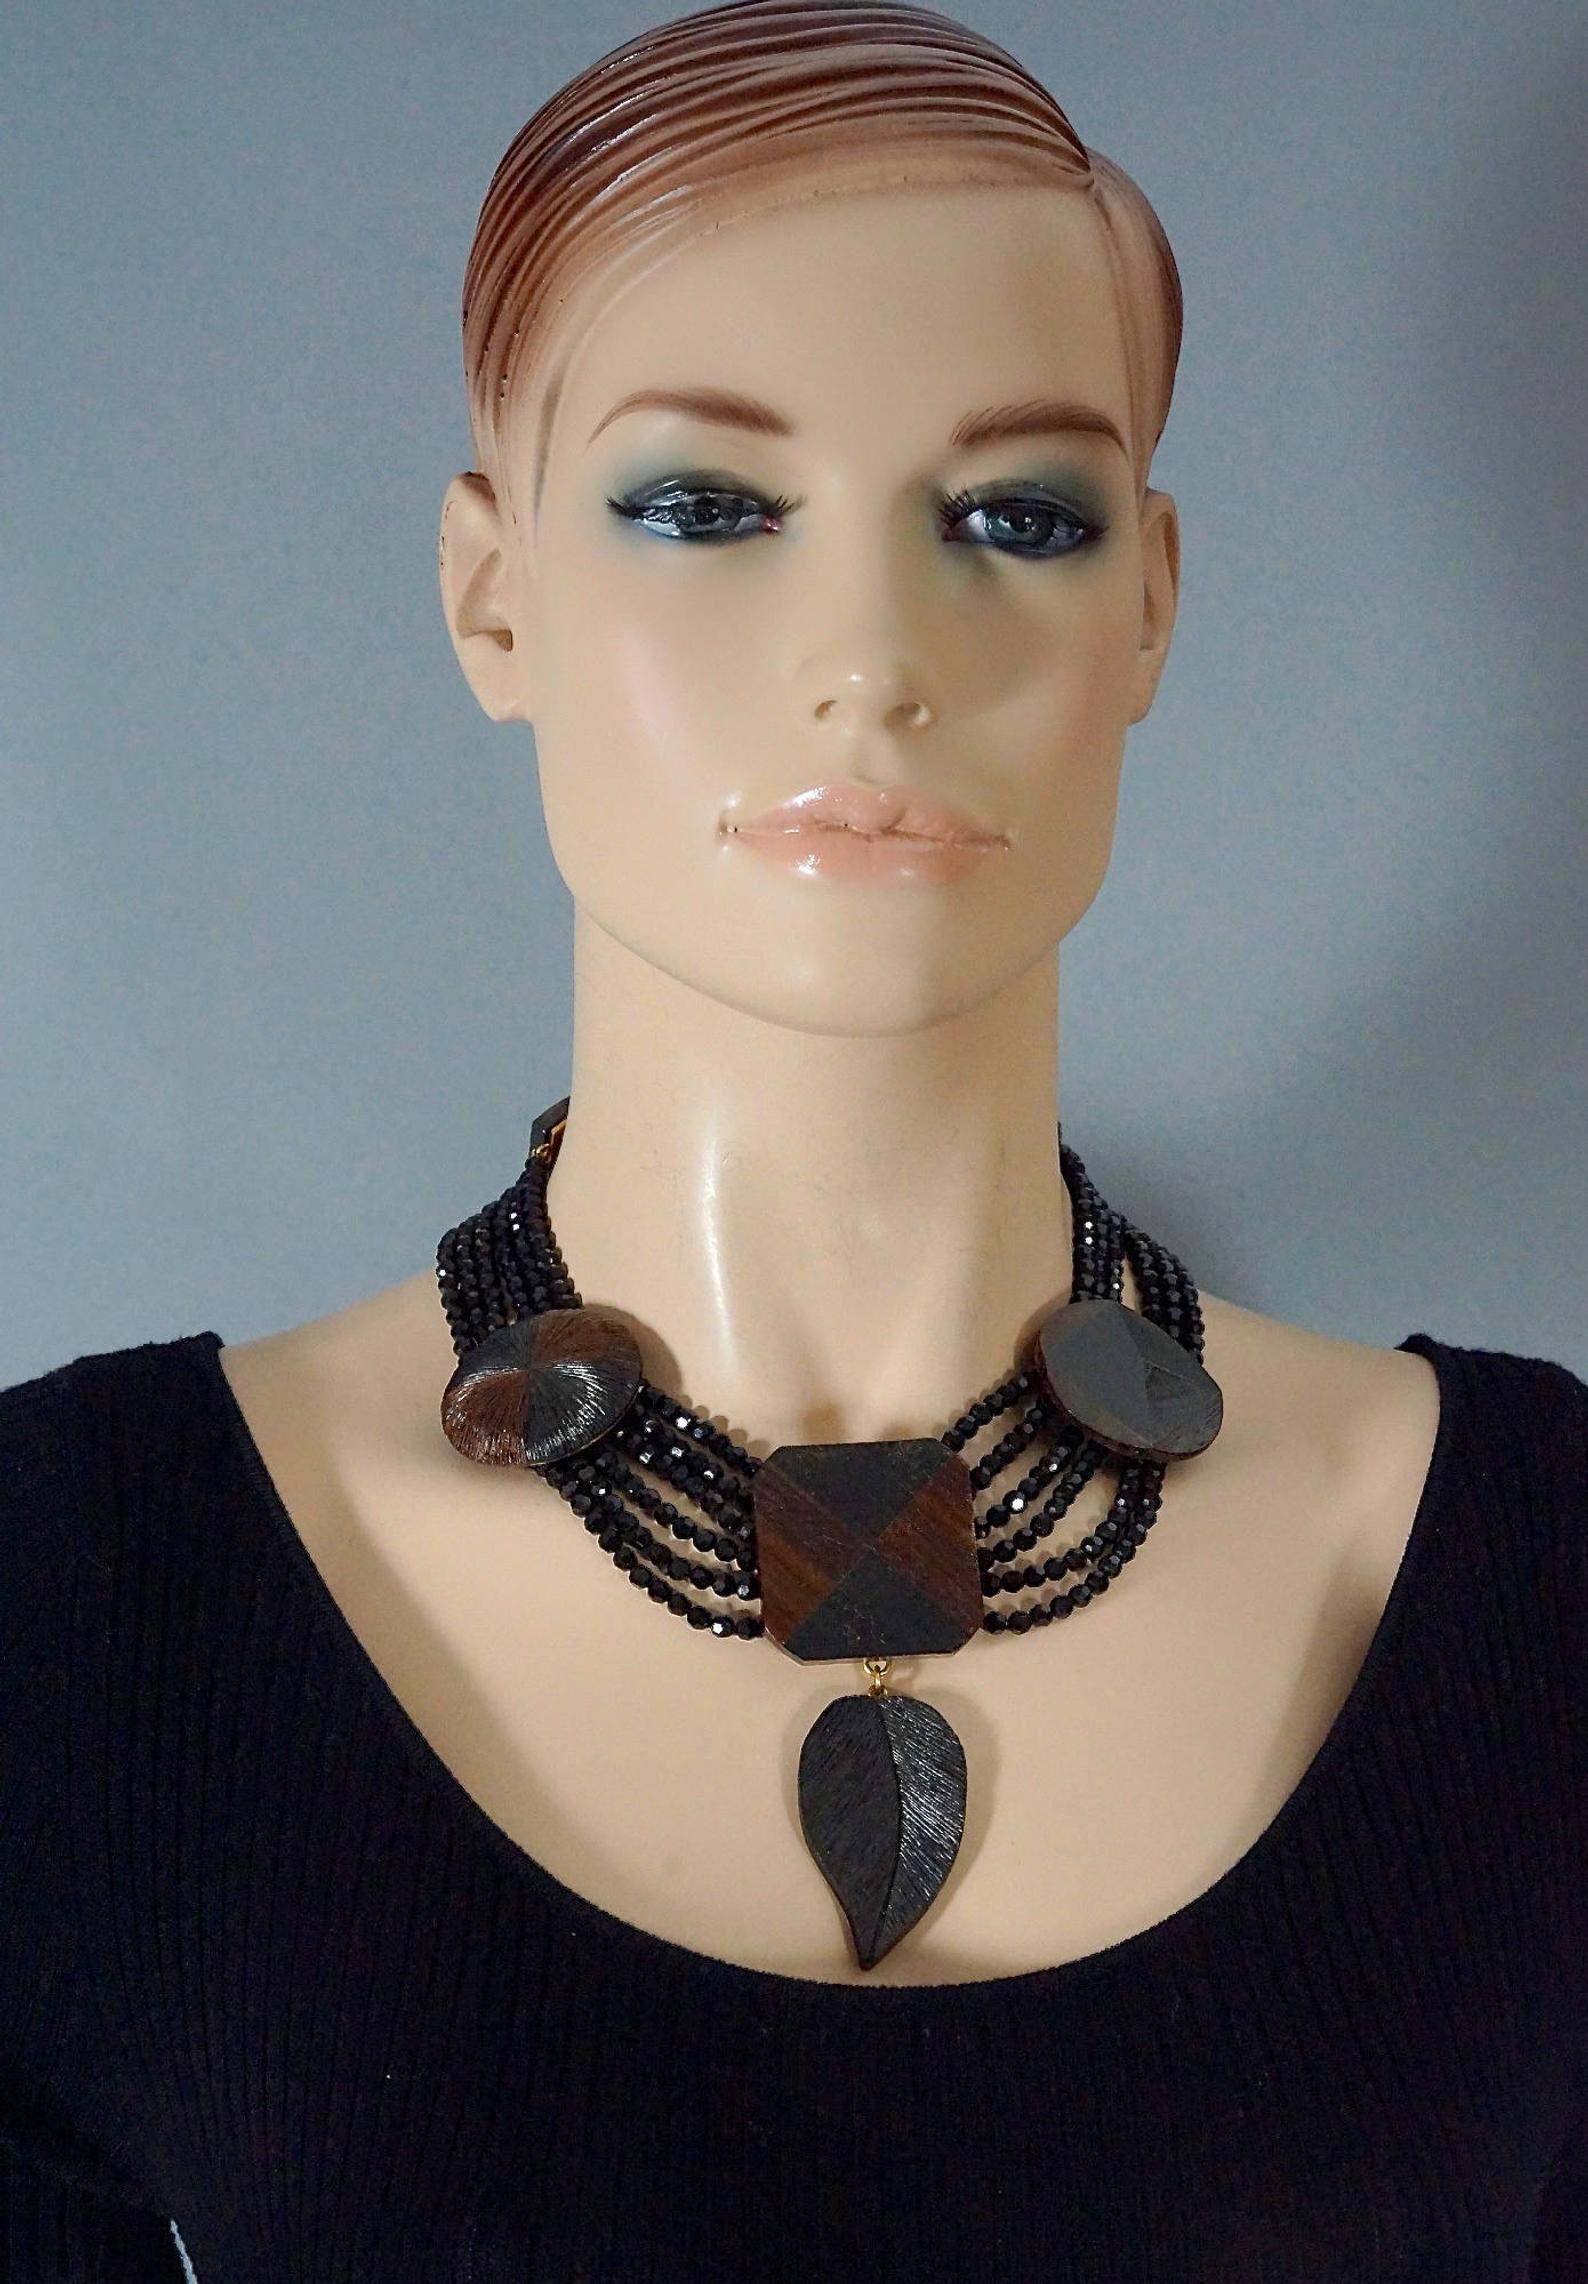 Vintage YVES SAINT LAURENT Ysl Geometric Wood Marquetry Multi Layer Bead Necklace

Measurements:
Centrepiece Height: 4.13 inches (10.5 cm)
Wearable Length: 15.35 inches (39 cm) to 17.32 inches (44 cm)

Features:
- 100% Authentic YVES SAINT